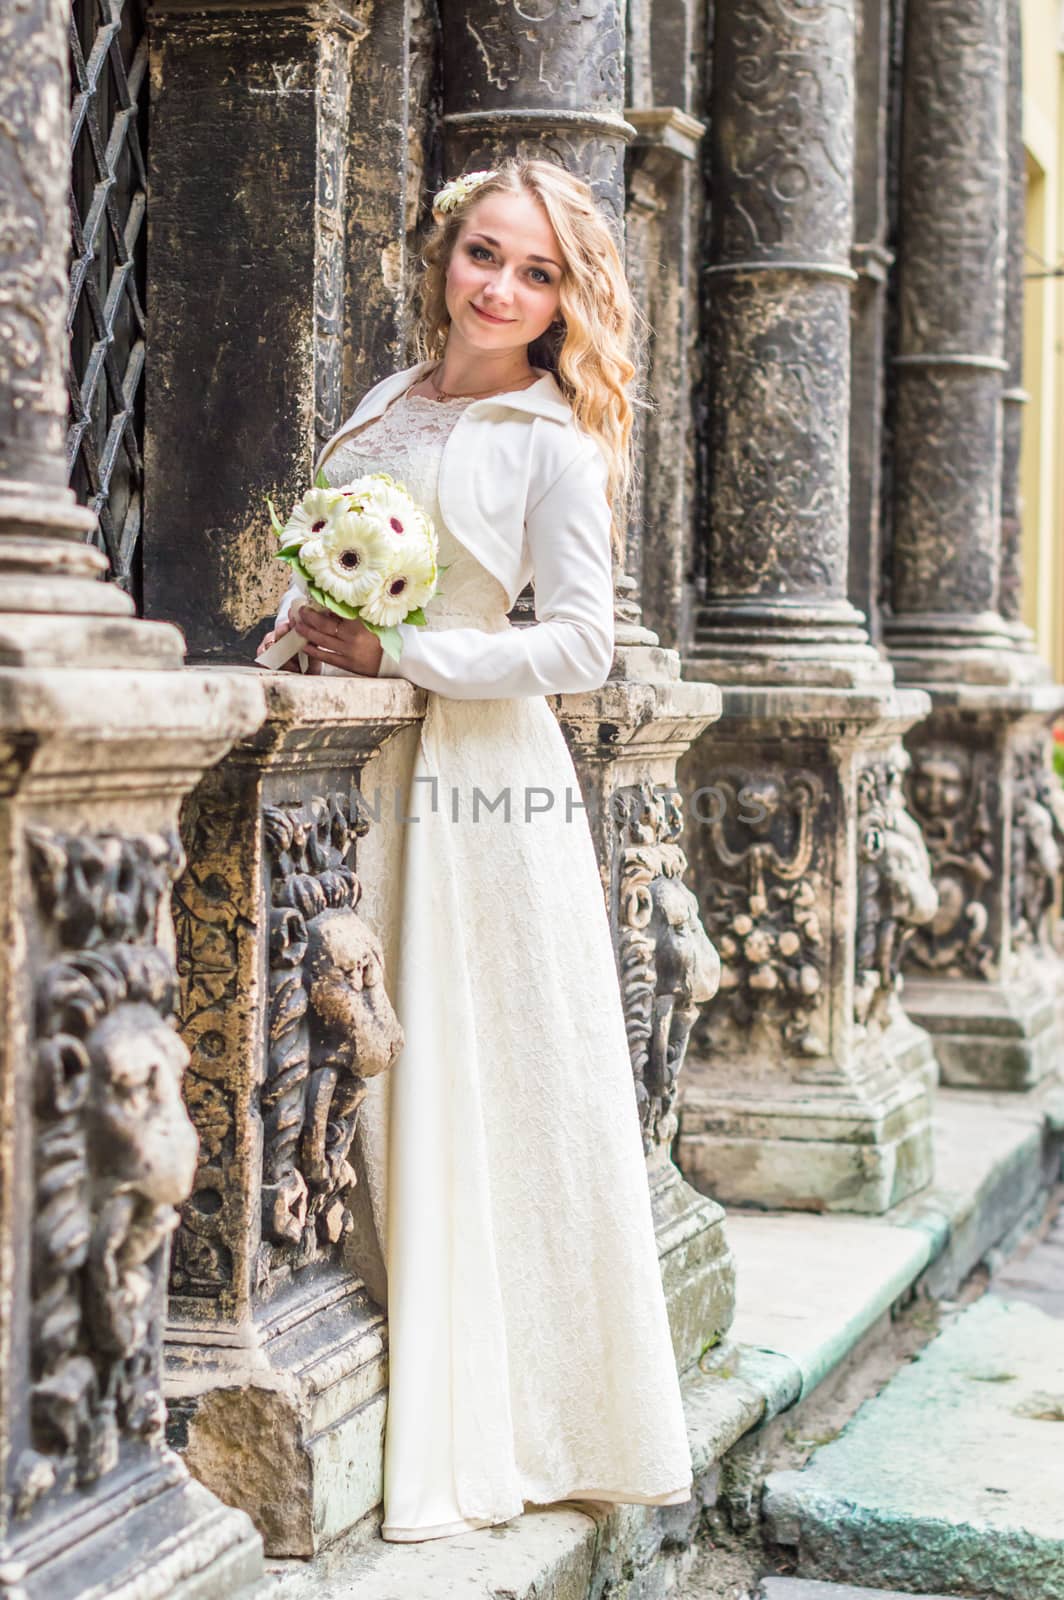 Portrait of a bride in a white dress in the city